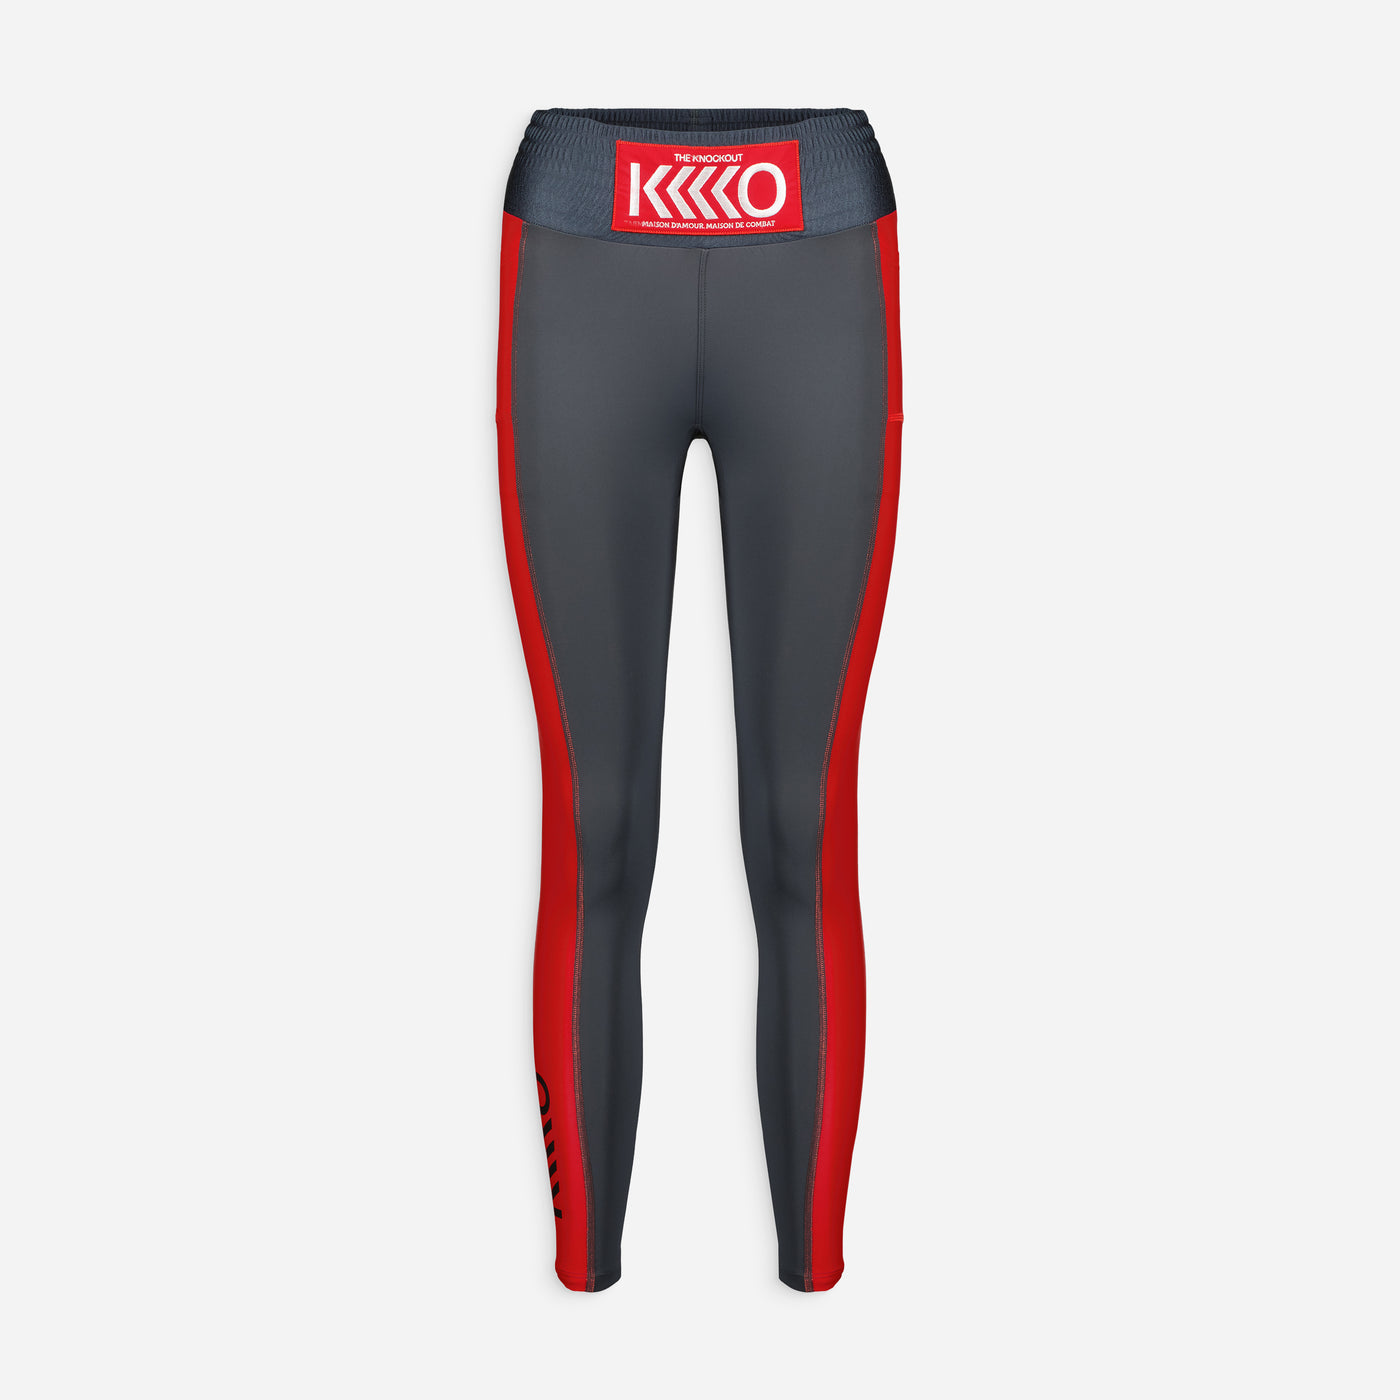 Th Knockout Paris - Kick-In Legging to improve your boxing style